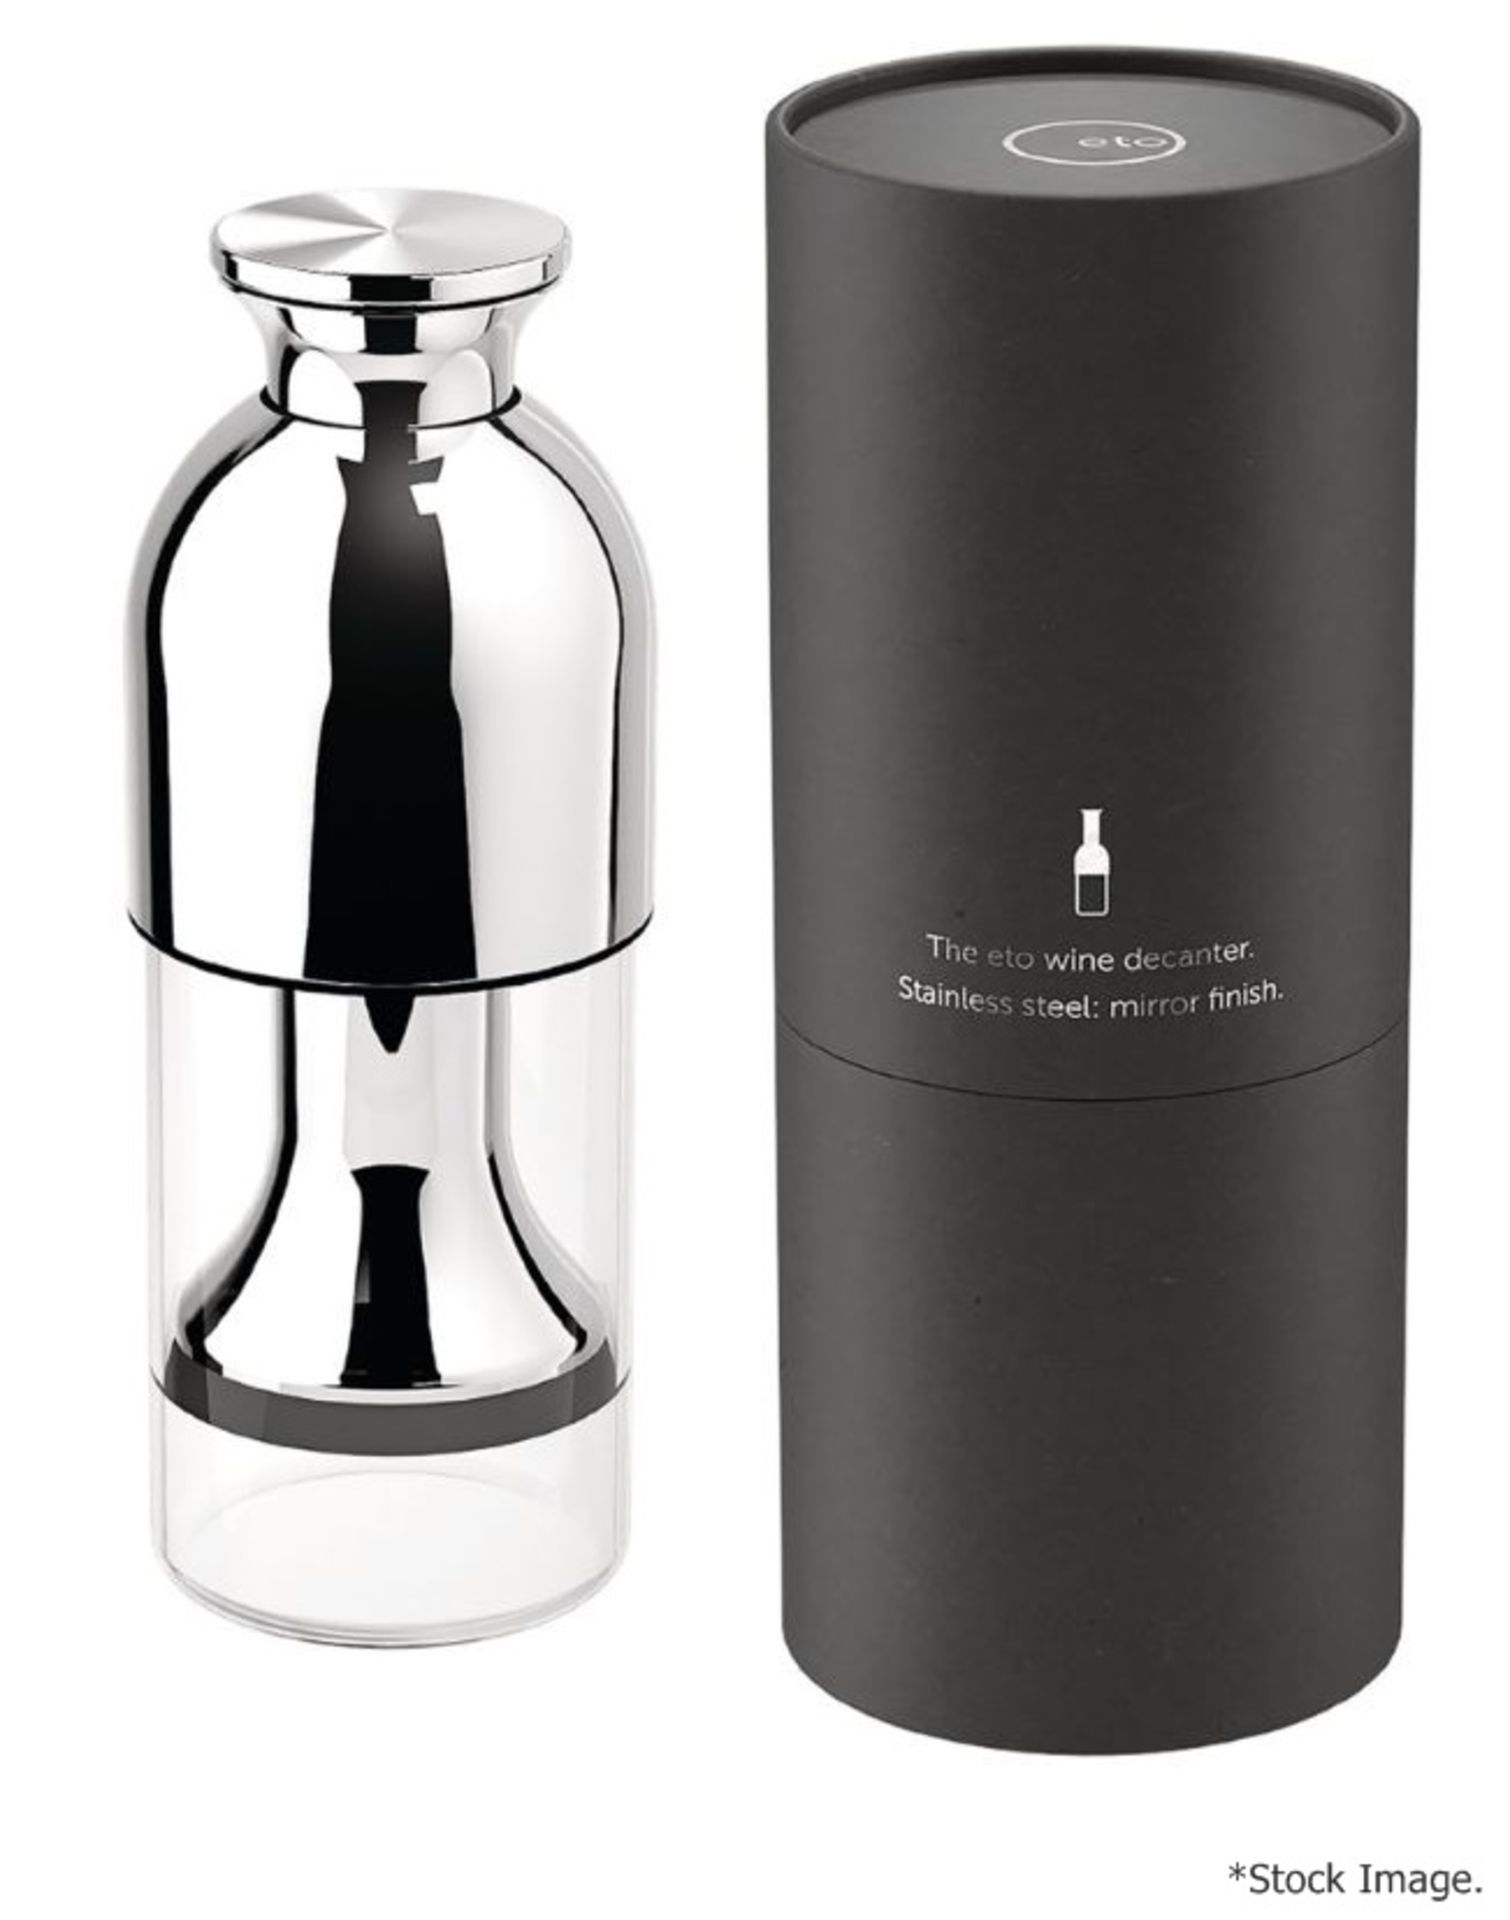 1 x ETO Stainless Steel Wine Decanter - Original Price £129.00 - Boxed Stock - Ref: HAS1071/APR22/ - Image 2 of 8